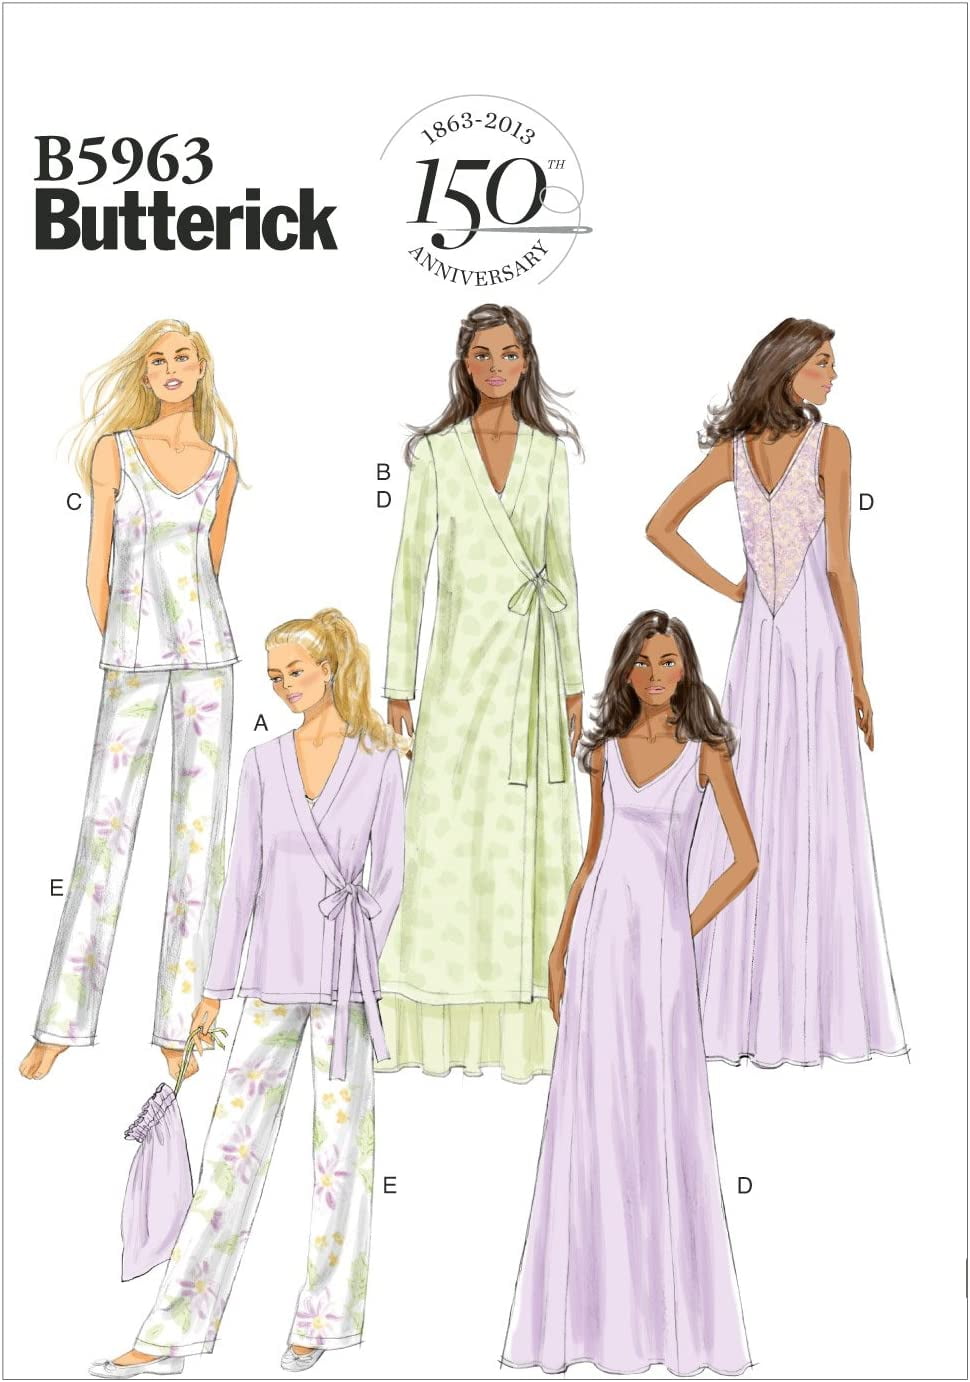 Butterick Patterns B5963 Misses' Robe, Top, Gown, Pants and Bag